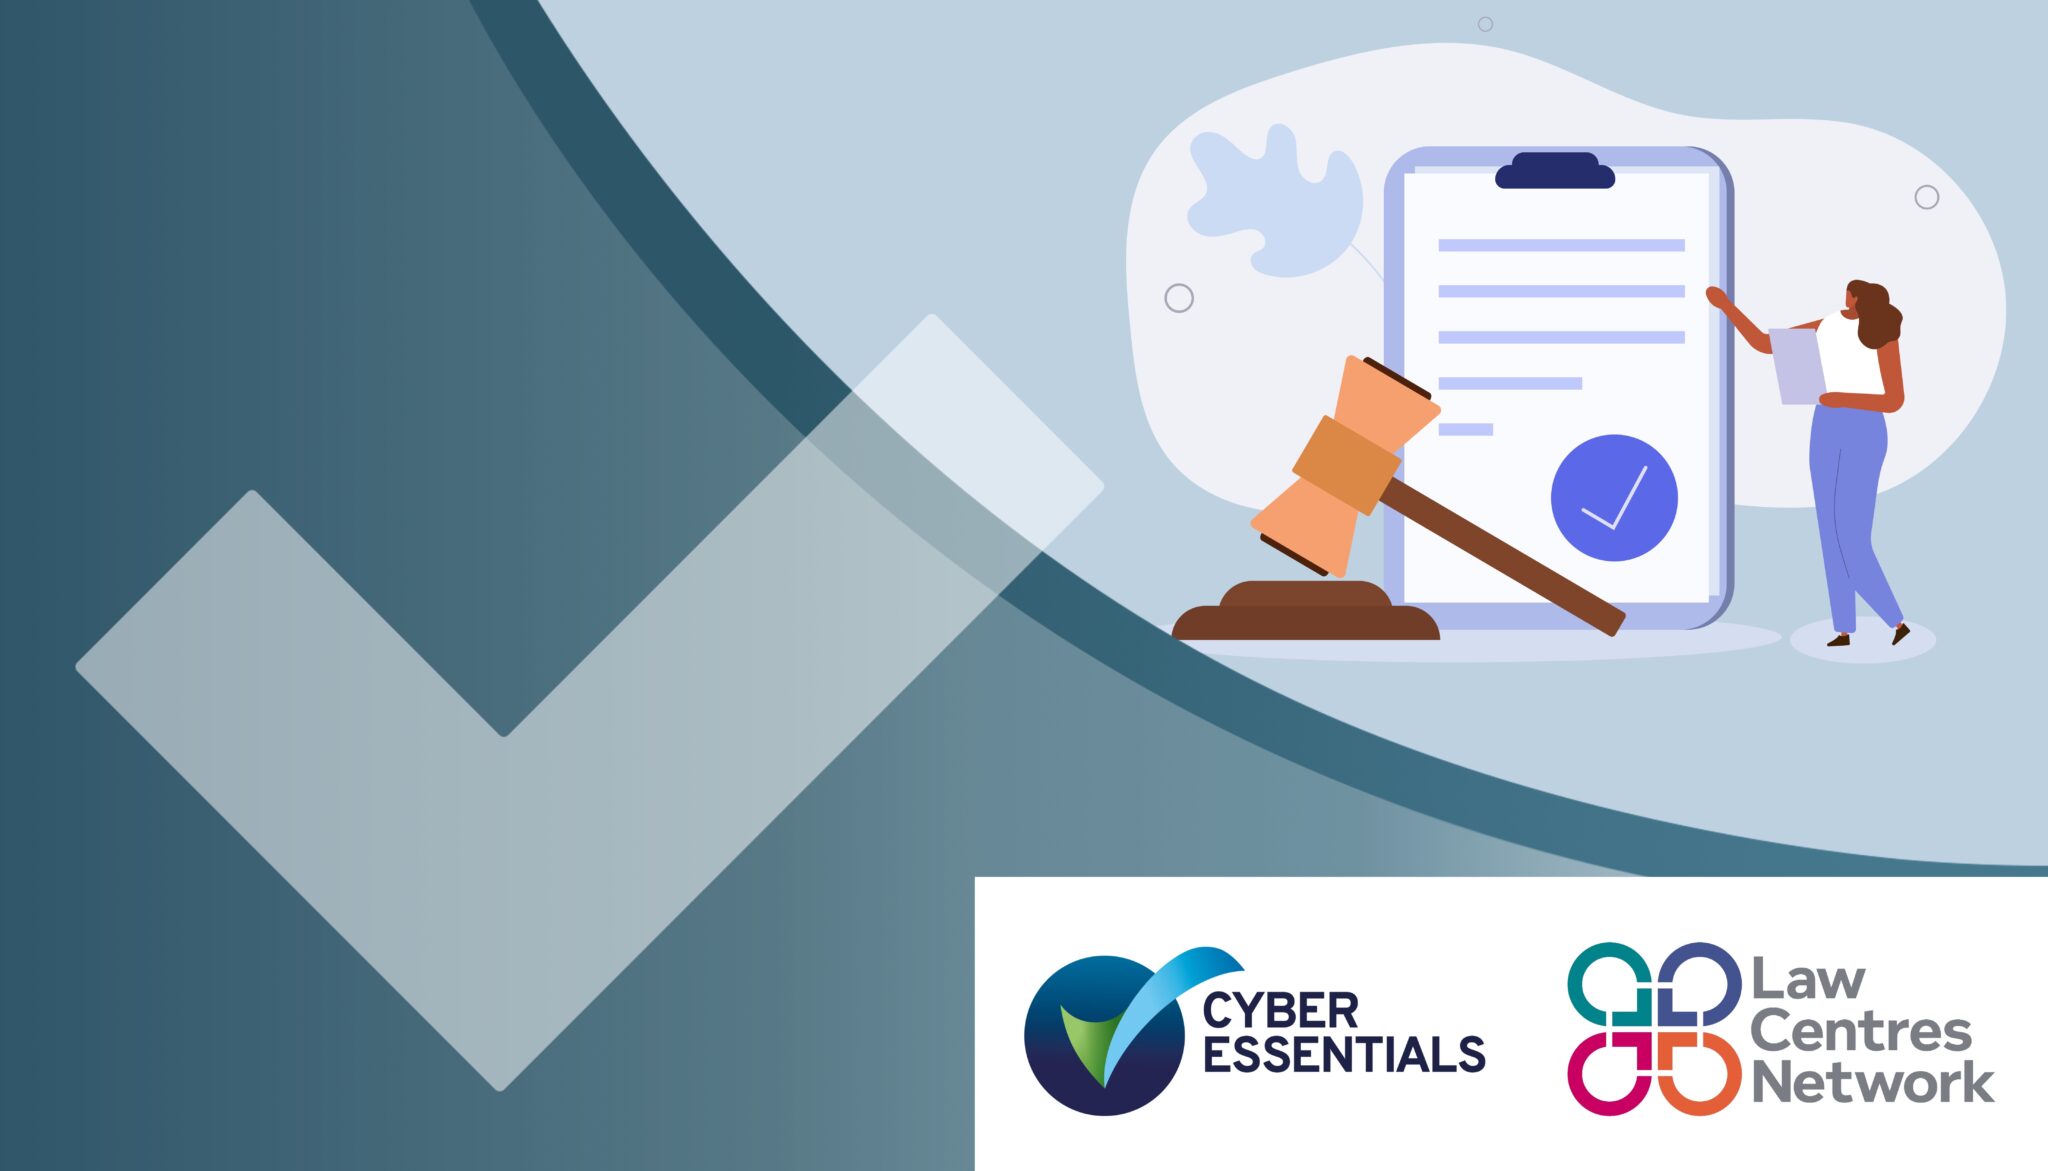 The funded Cyber Essentials programme supports the Law Centres Network